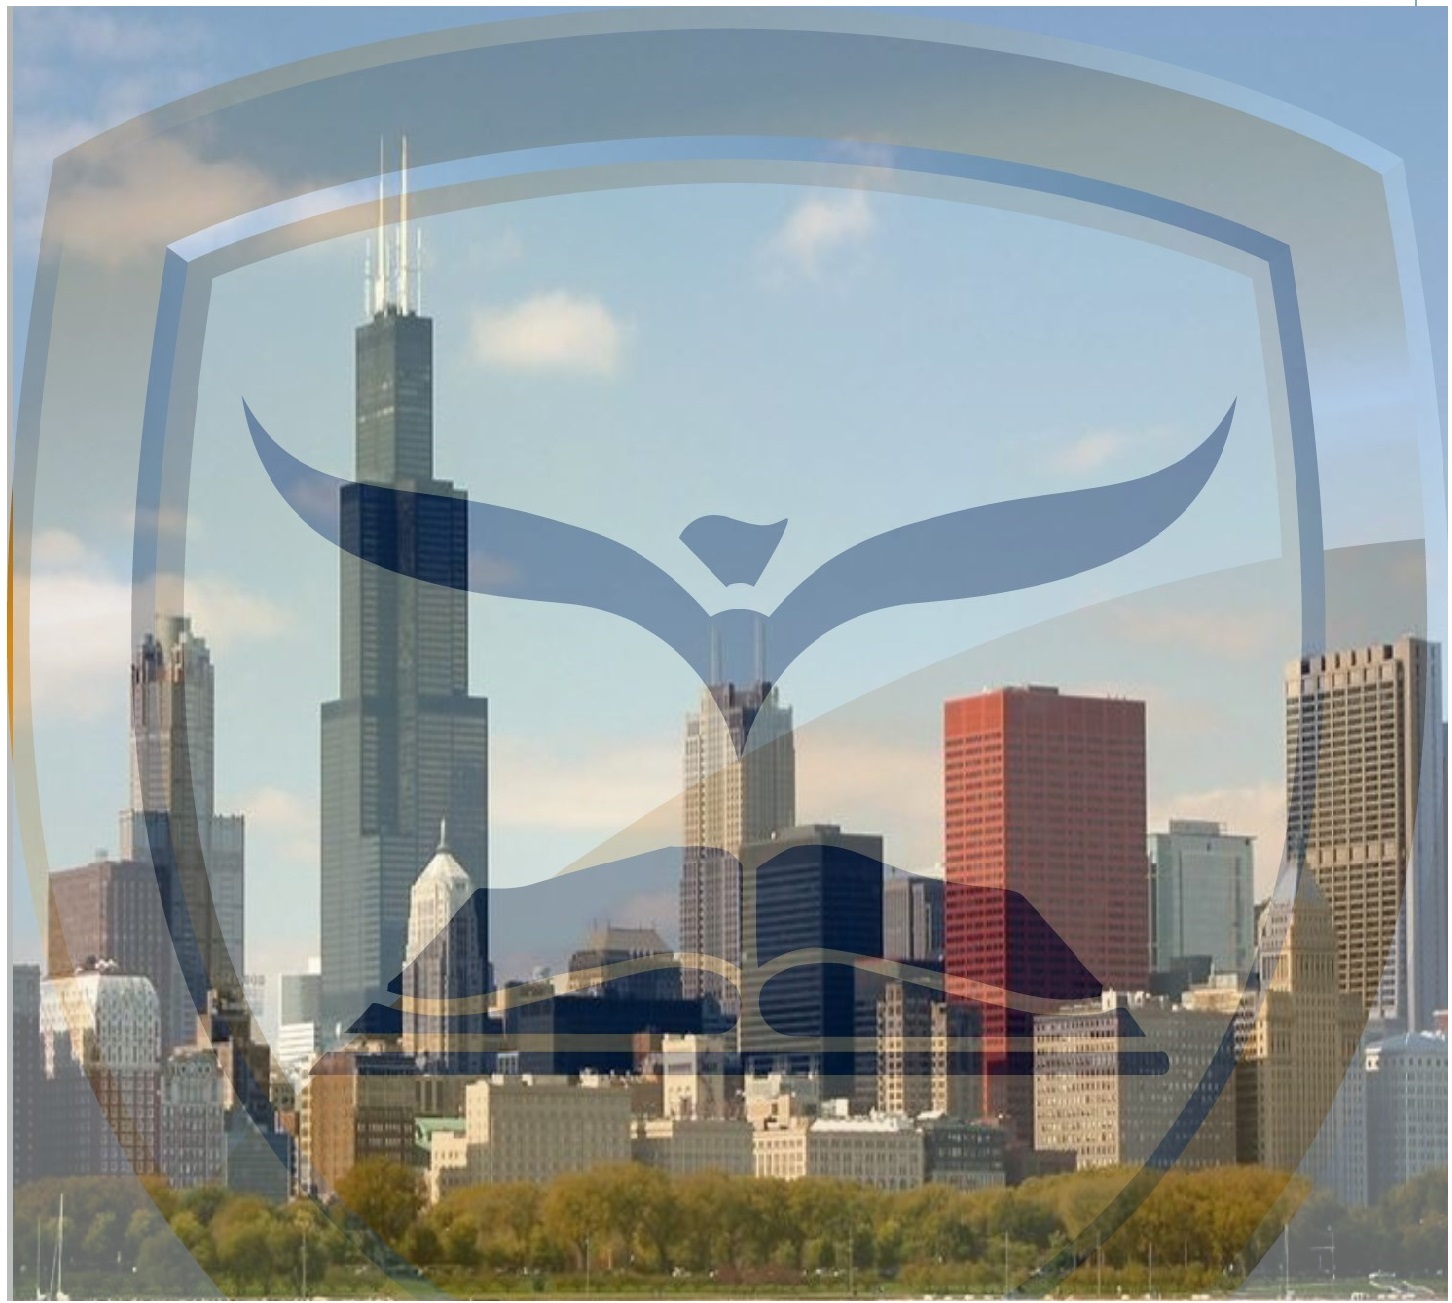 Chicago IL with NTCC Logo superimposed